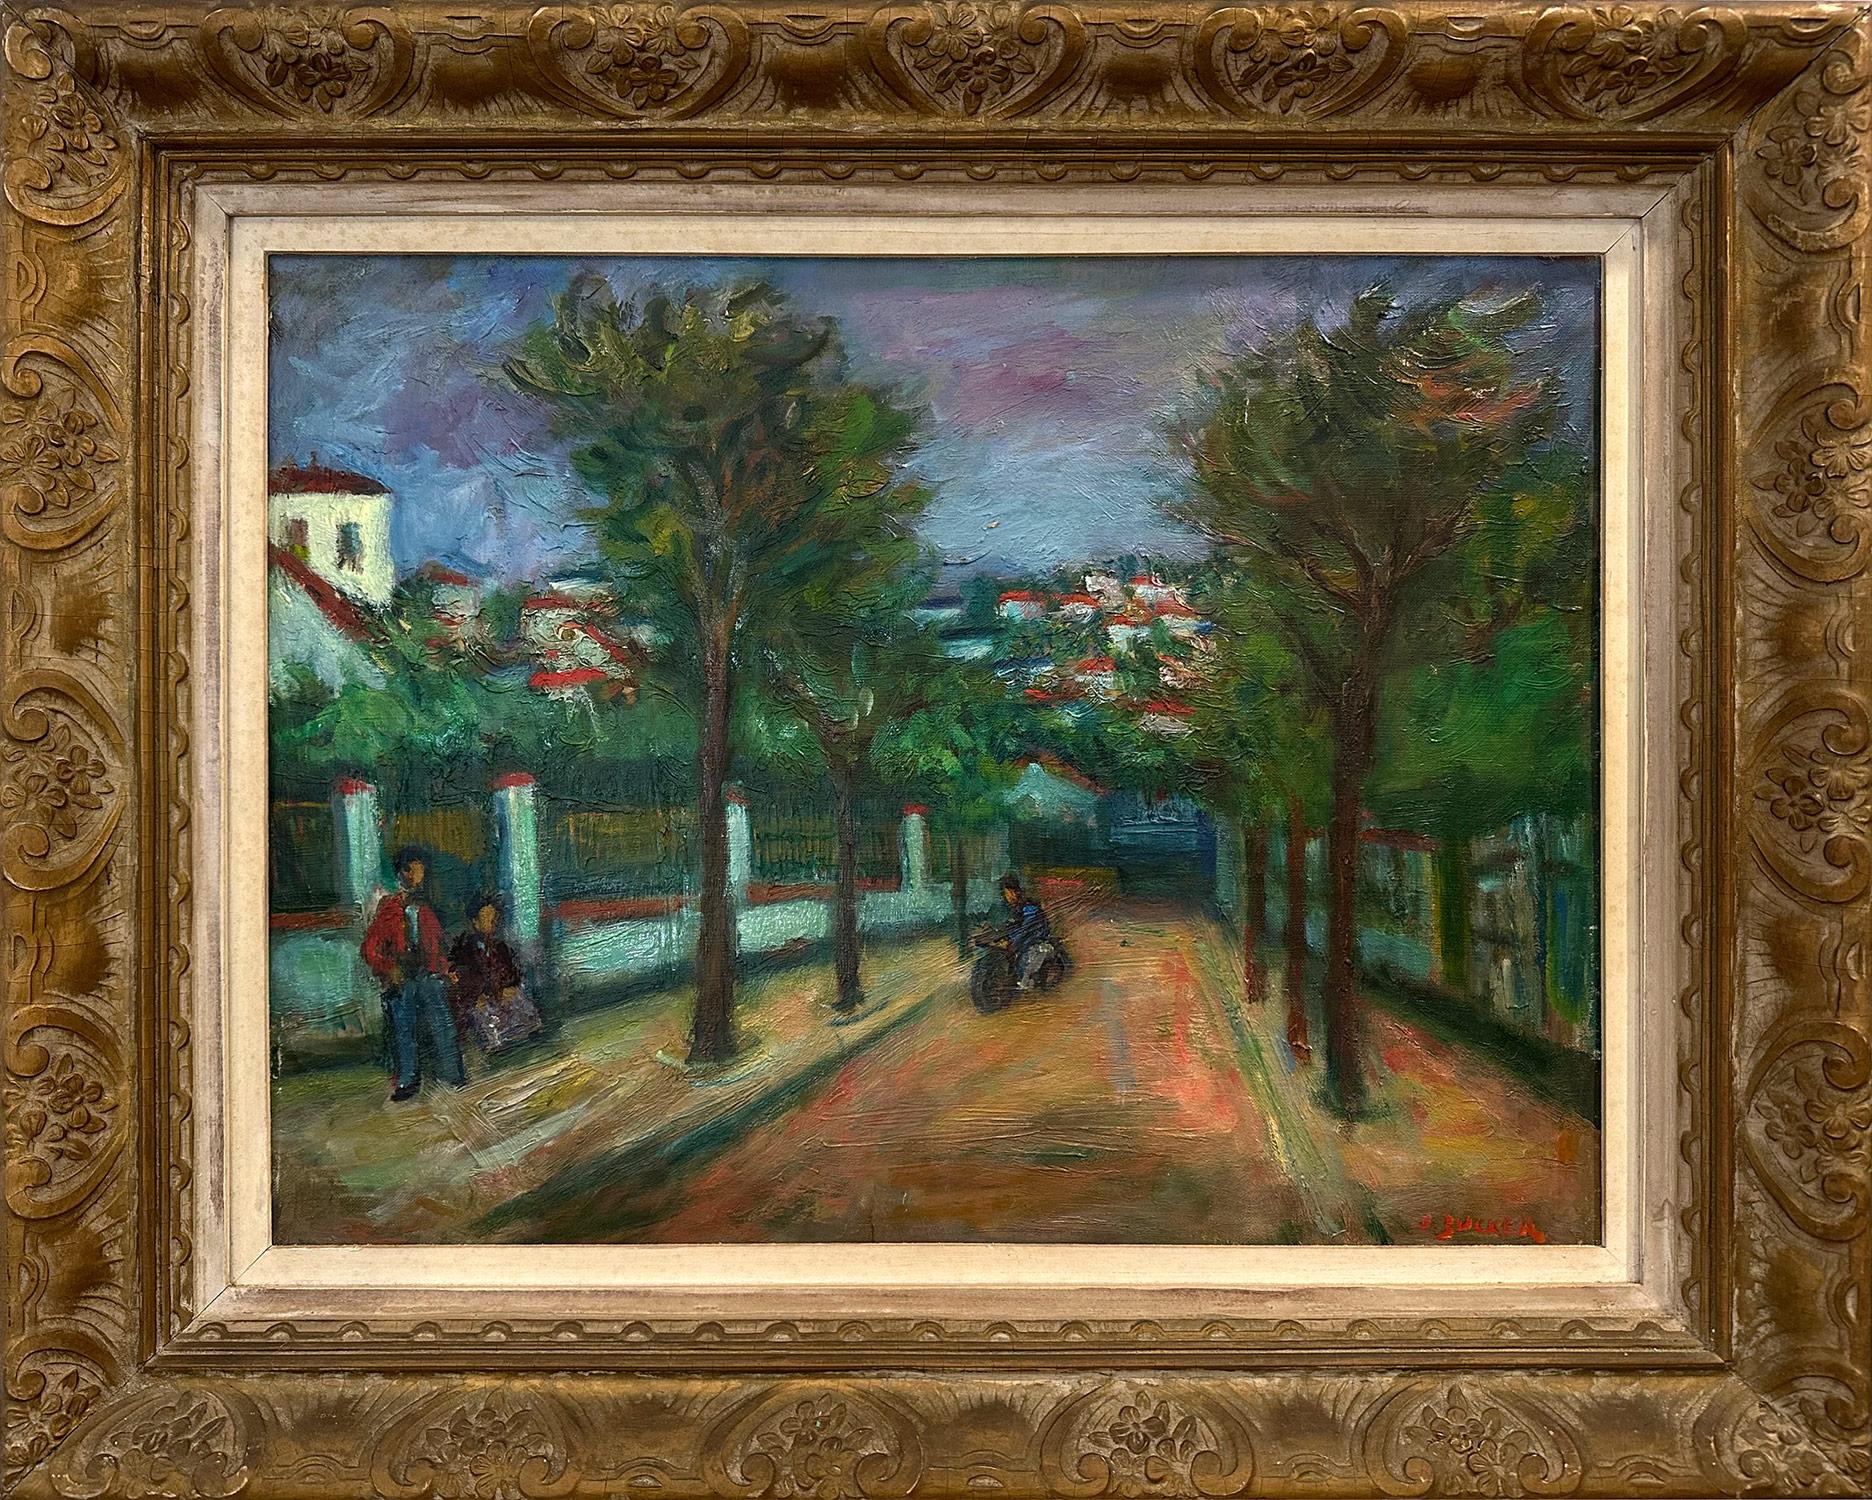 Jacques Zucker Landscape Painting - "Riding Through Town" Post-Impressionism French Village Oil Painting on Canvas